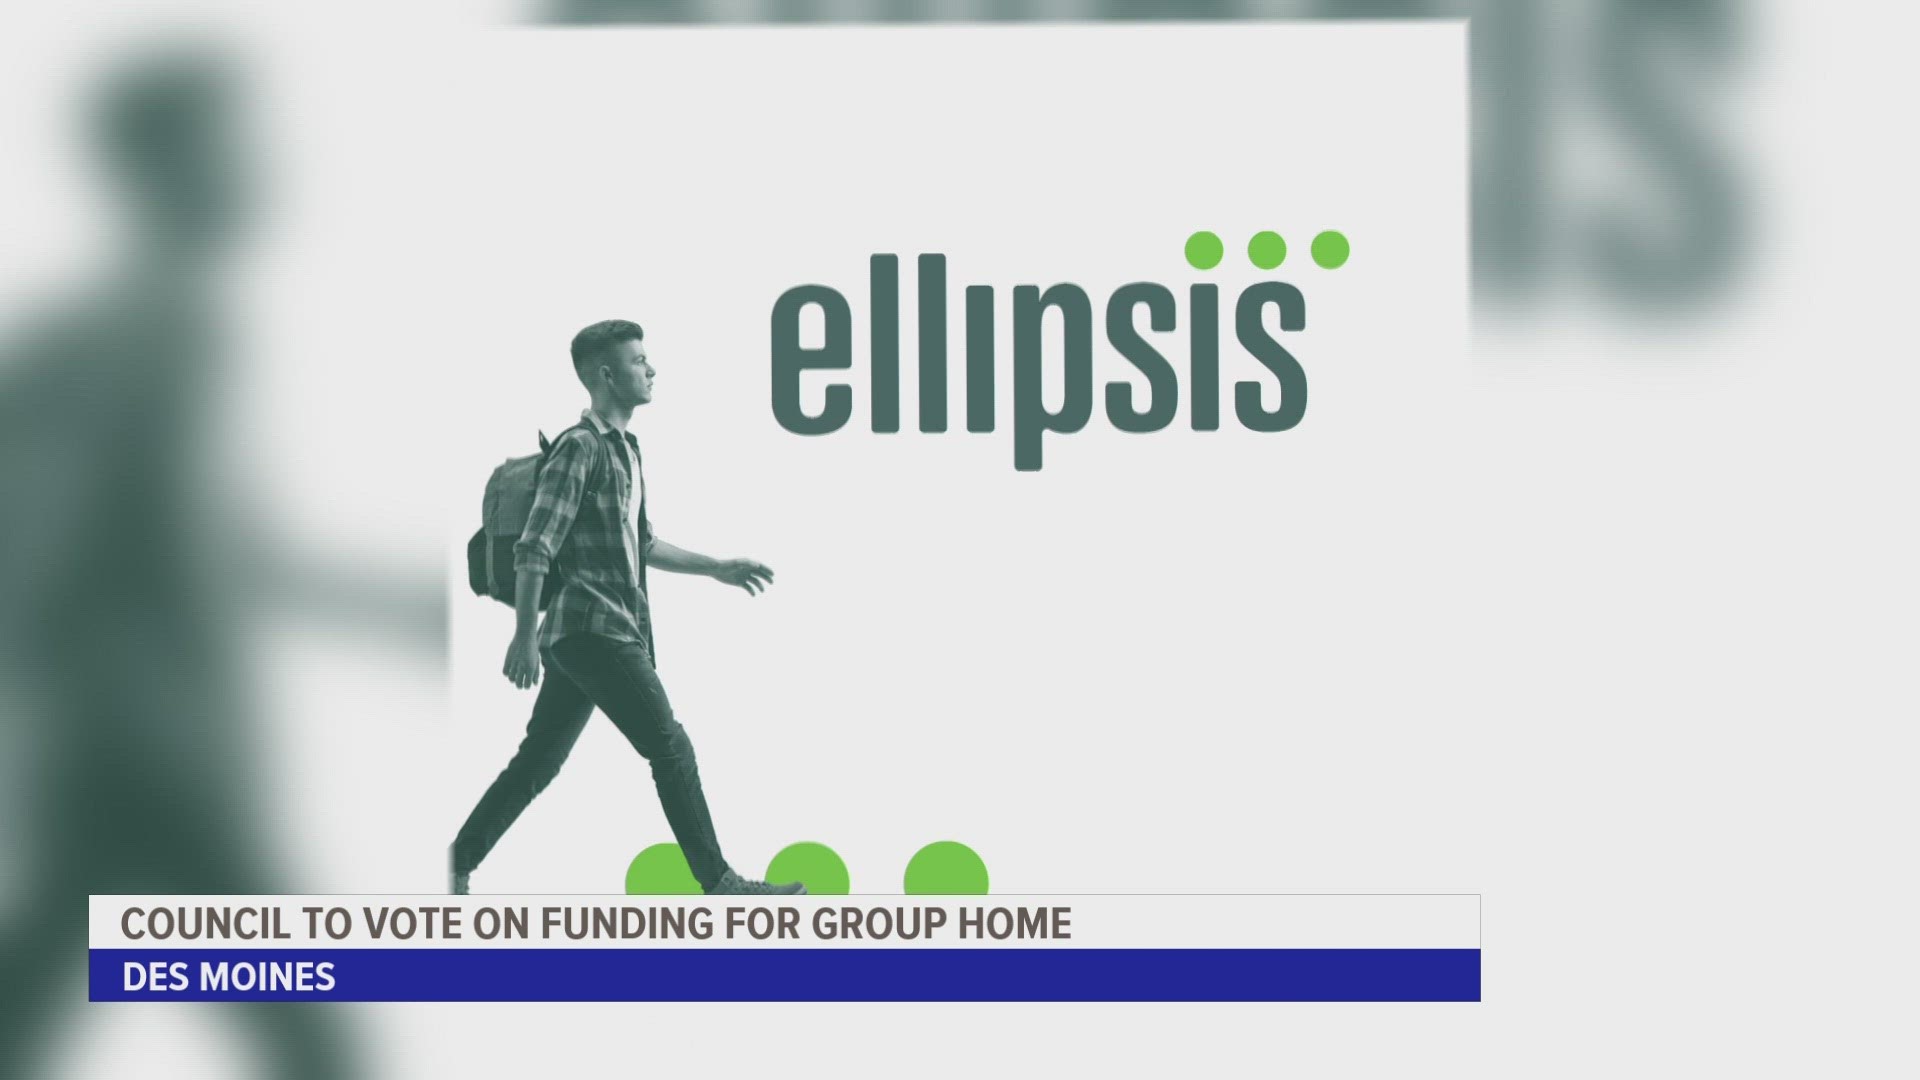 Child welfare nonprofit Ellipsis' will use the funds to transform an office space into a group home for young women ages 16 to 21.